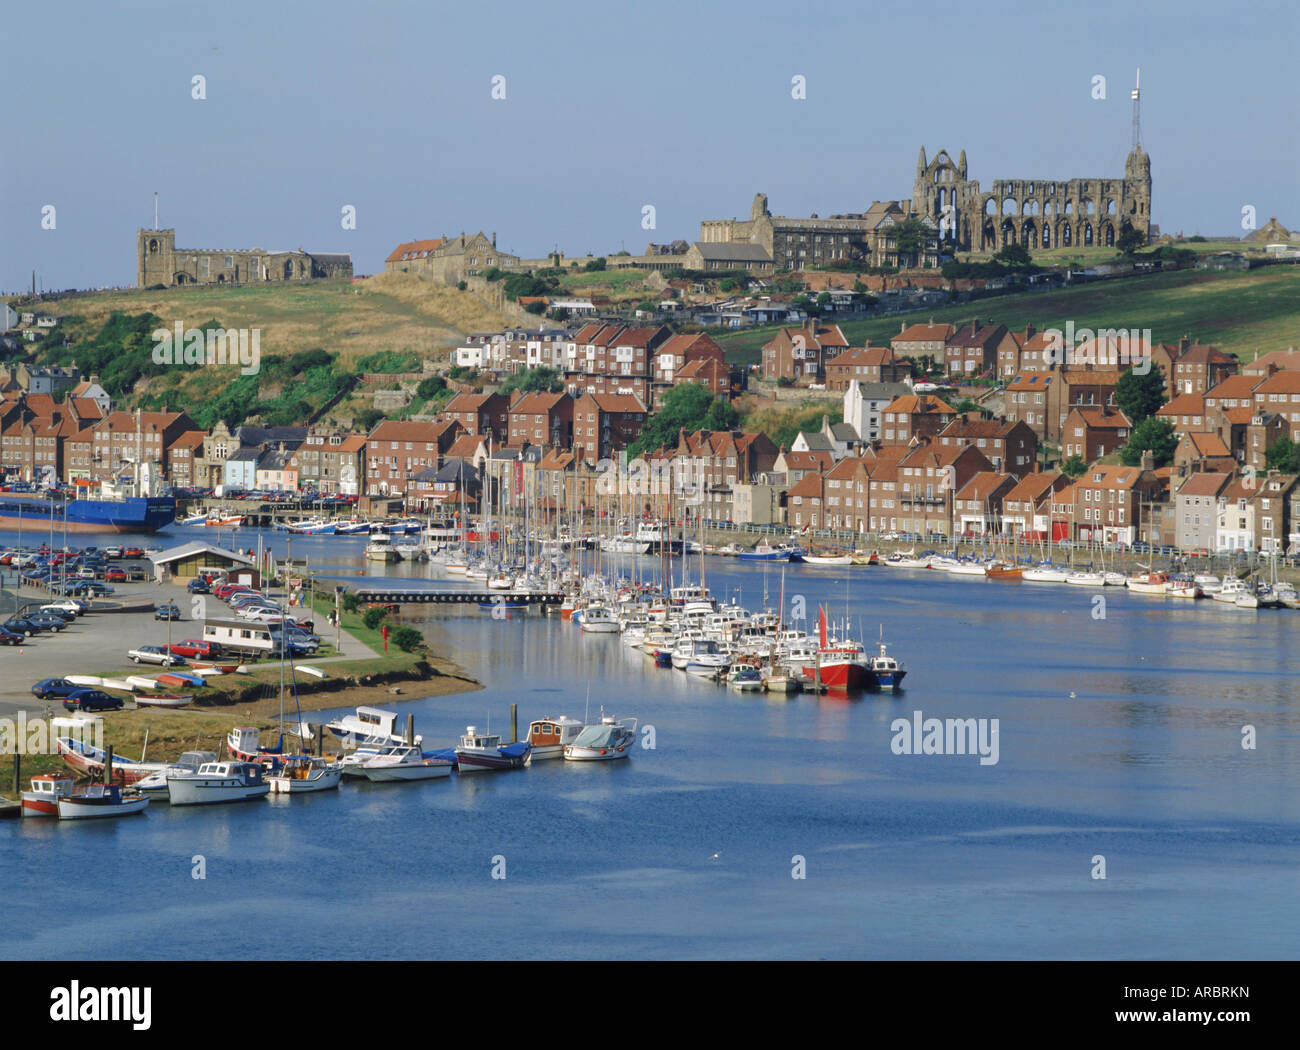 Harbour, abbey and St. Mary's church, Whitby, Yorkshire, England, UK, Europe Stock Photo